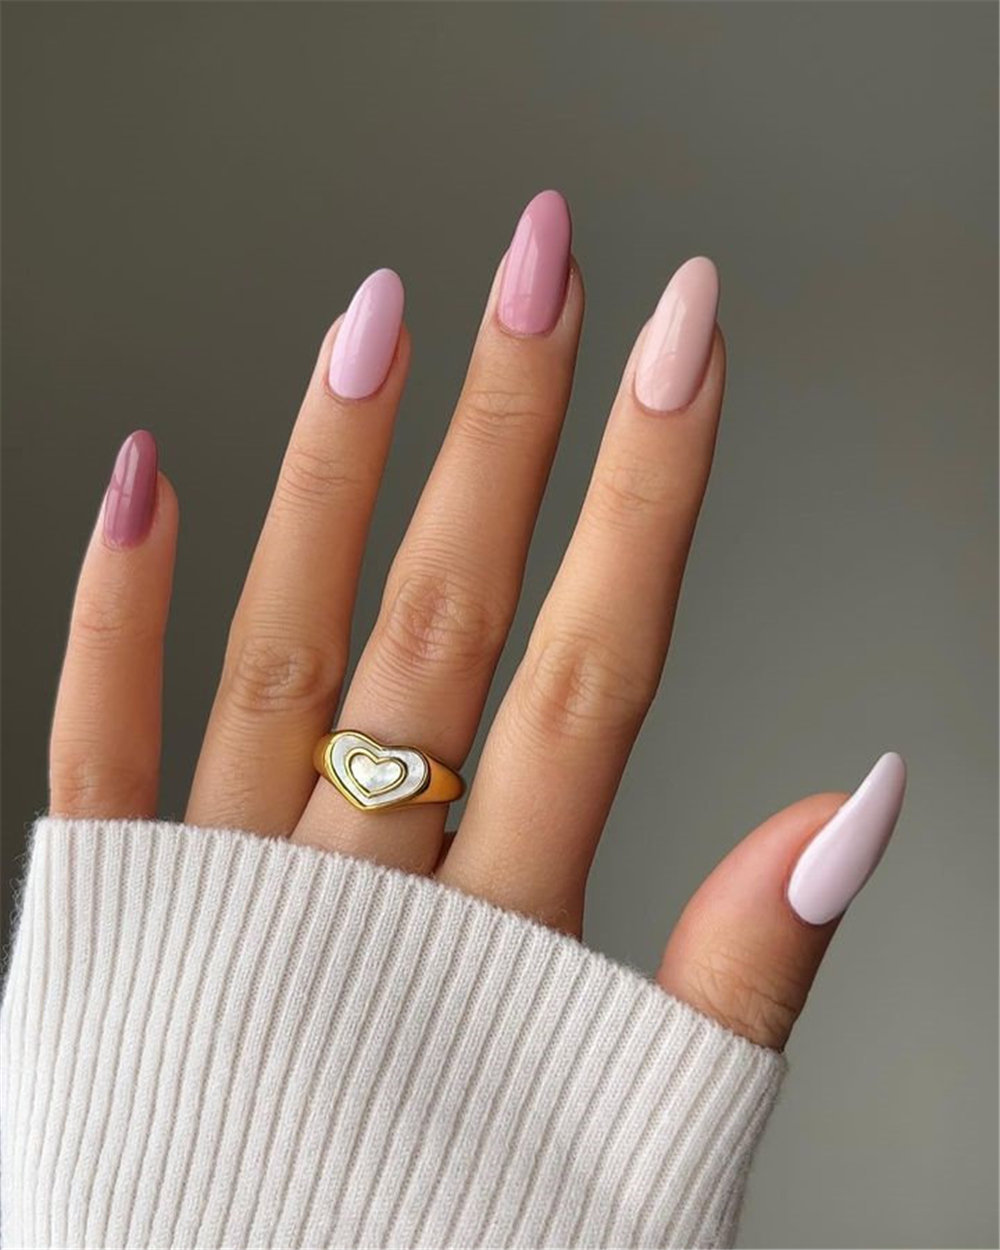 cute and simple Spring nail art ideas and designs, Spring Nails, spring nails acrylic, Simple Spring Nails, short nails, #springnails #nailart #manicure #naildesigns